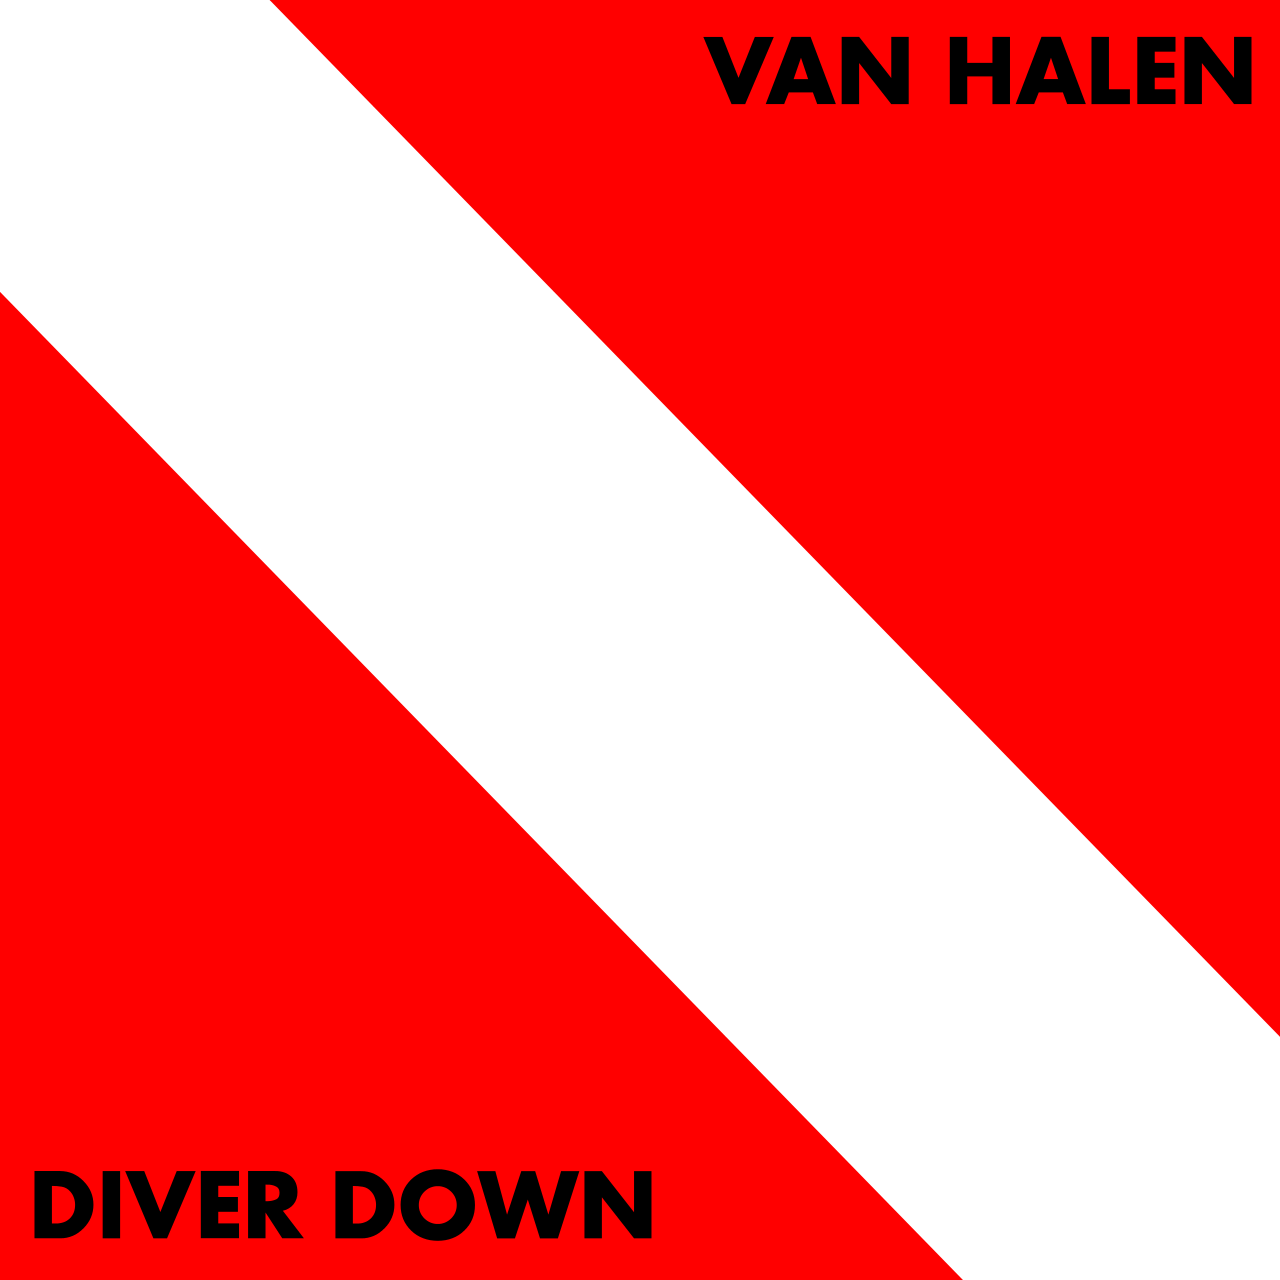 The "diver down" flag: a white band sloping diagonally down on a red field. "VAN HALEN" in the top right corner, "DIVER DOWN" in the bottom left